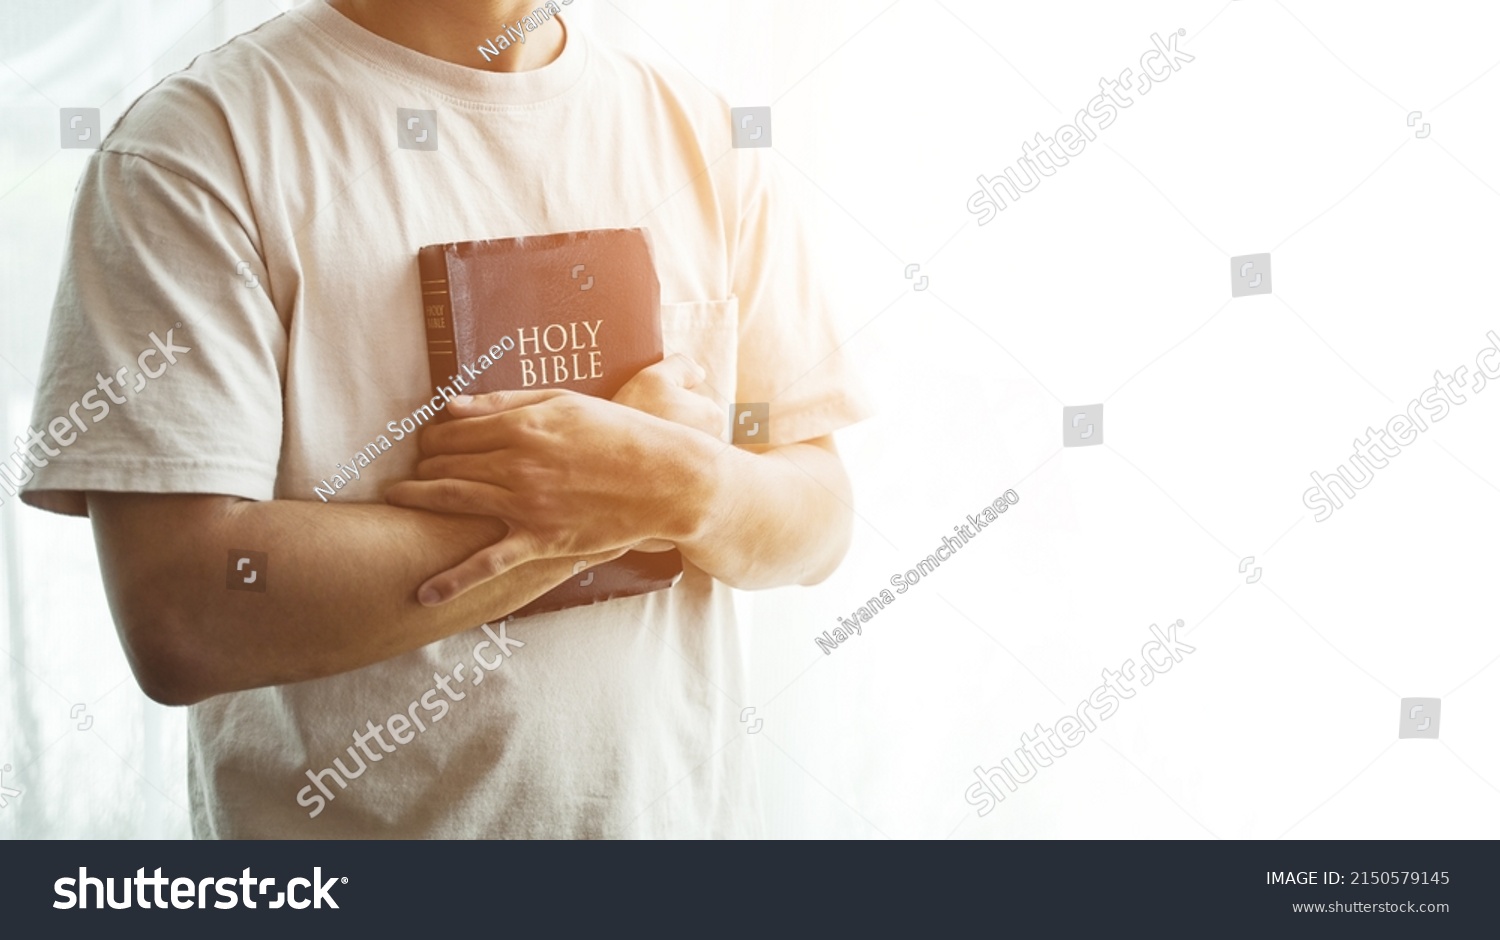 The Bible is in hand, praying by hand and praying together. with religious faith and belief in god on blessing background The power of hope or love and devotion. #2150579145